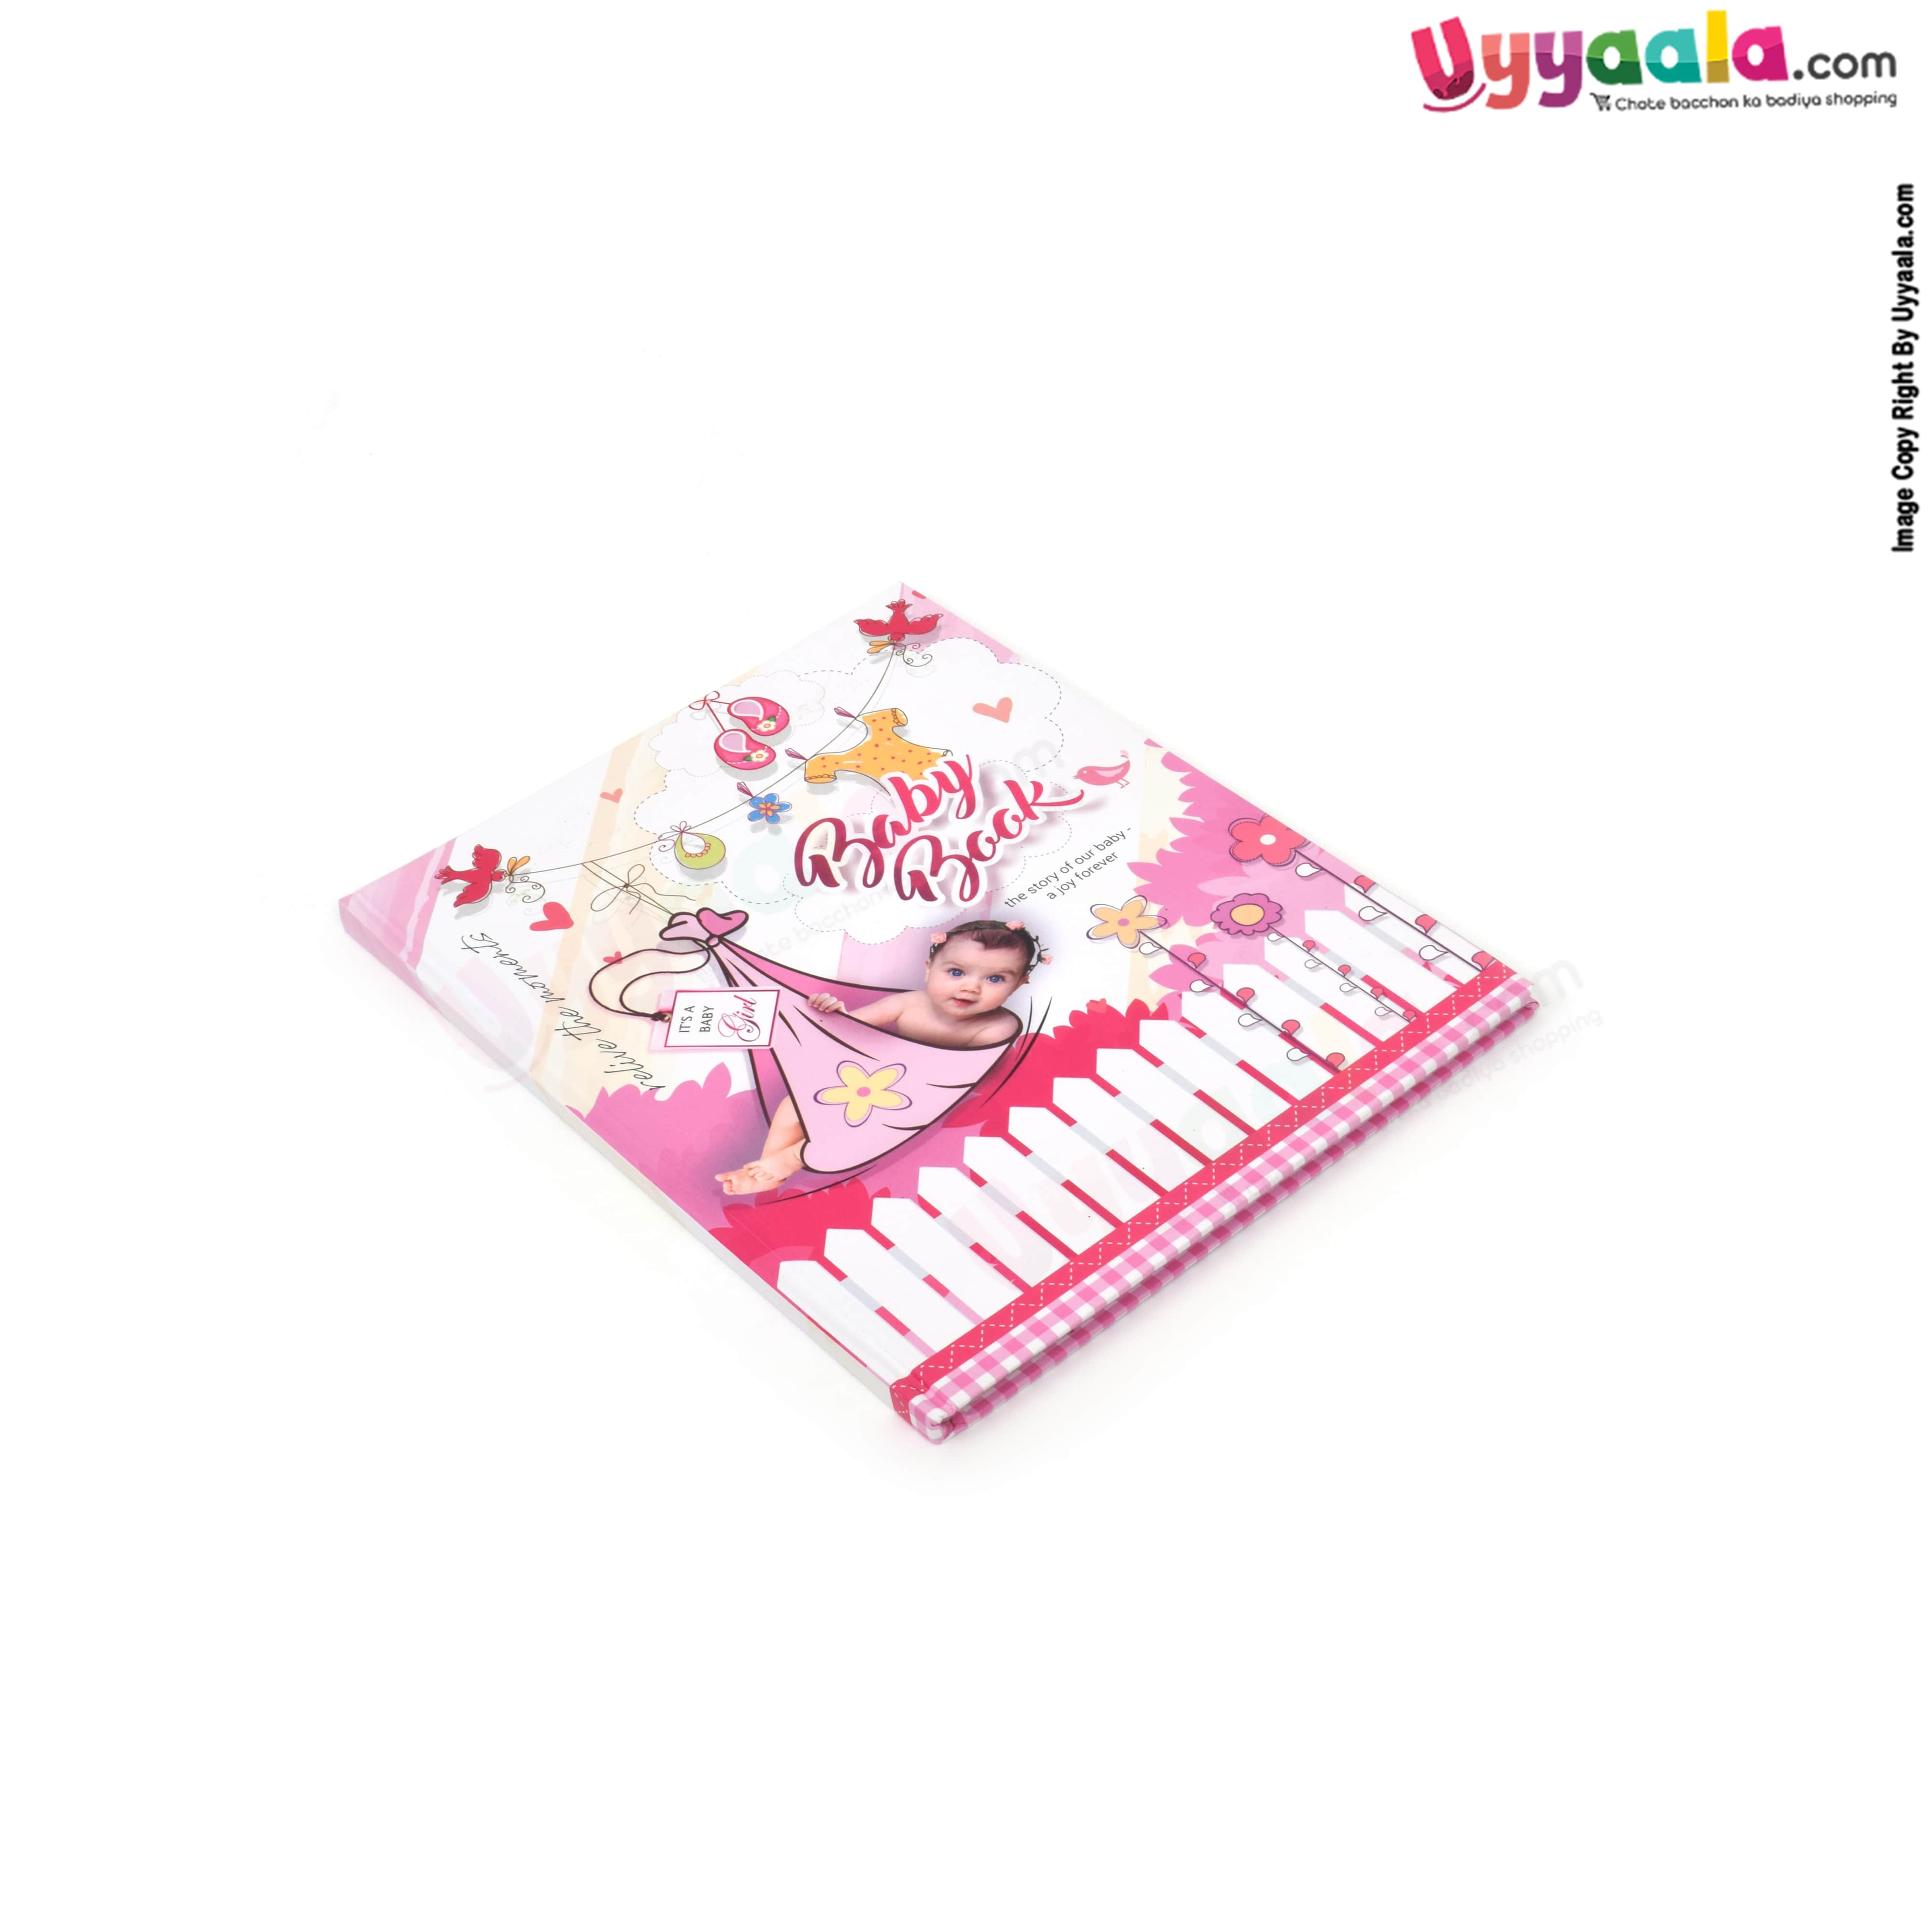 BABY record book for baby memories - it's a baby girl